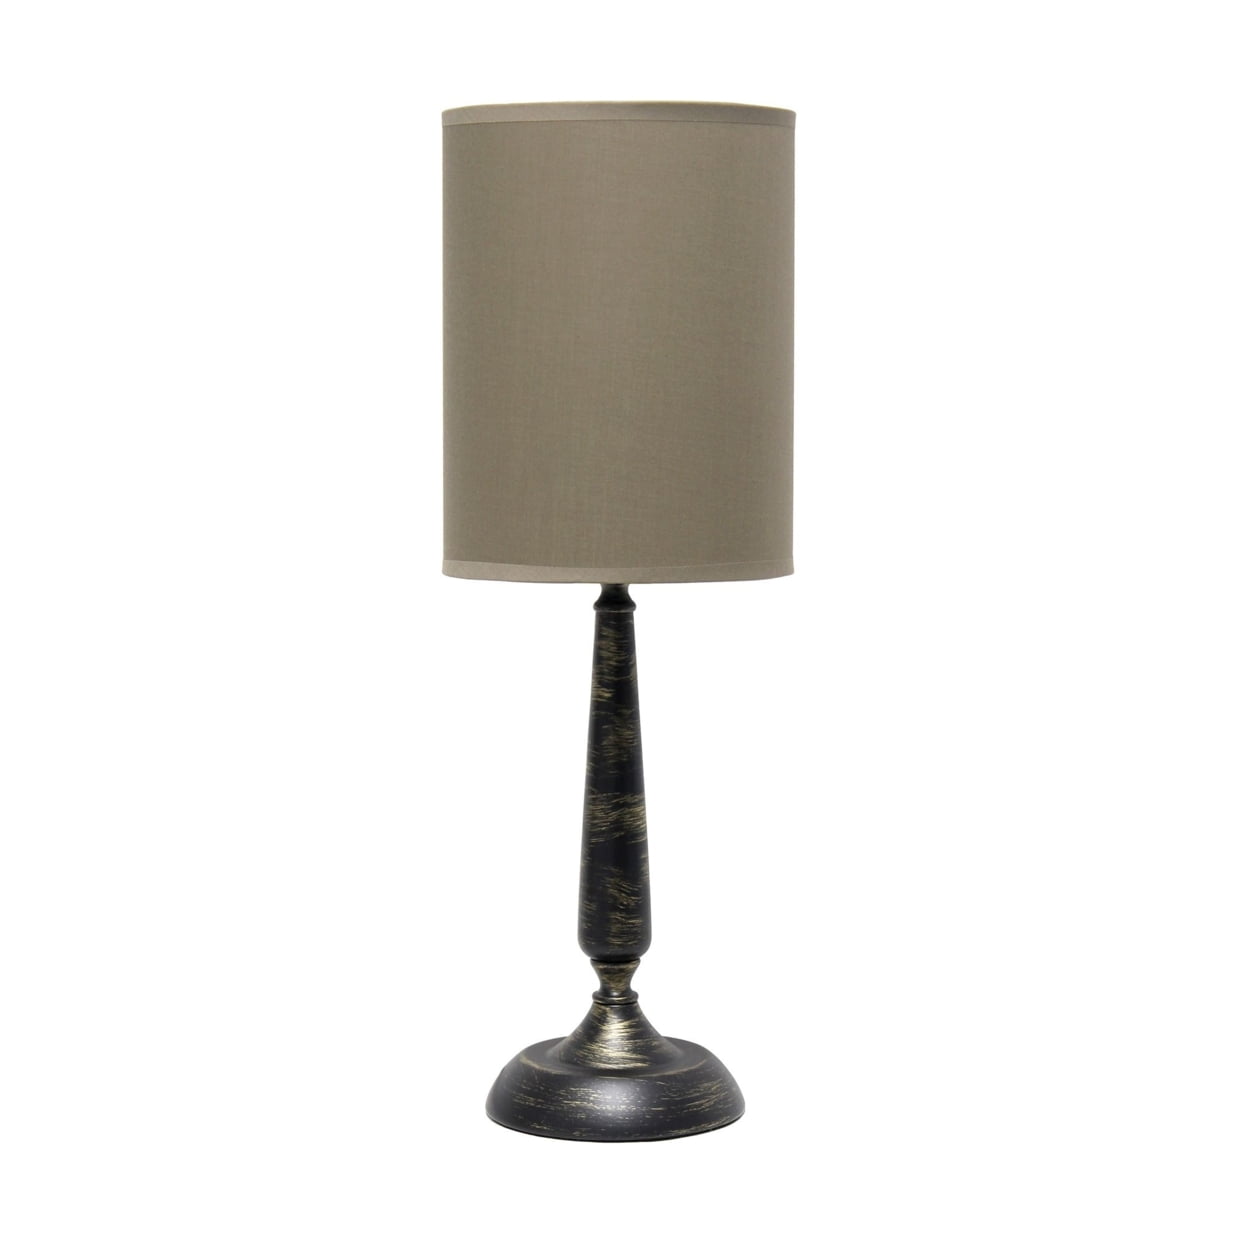 Simple Designs Traditional Candlestick Table Lamp, Oil Rubbed Bronze